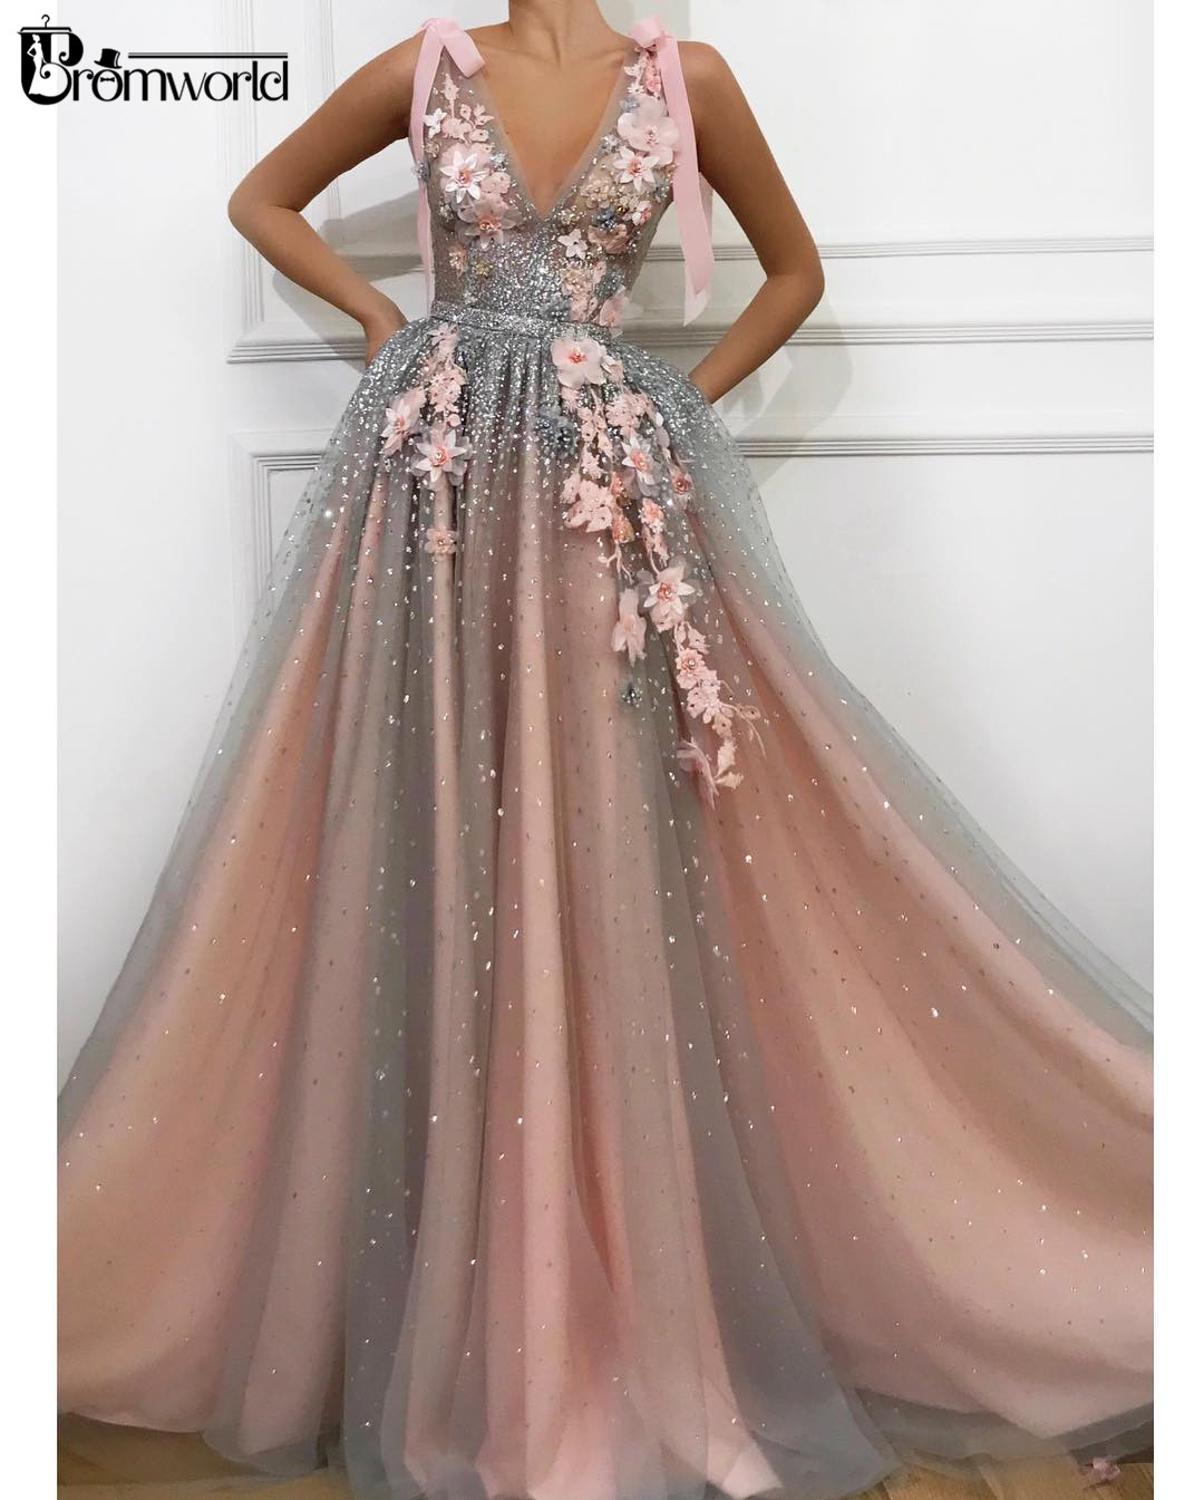 Pink Crystals Prom Dresses 2022 V-Neck Tulle Lace Flowers Beaded vestidos de gala Long Prom Gown Evening Party Robe De Soiree alx